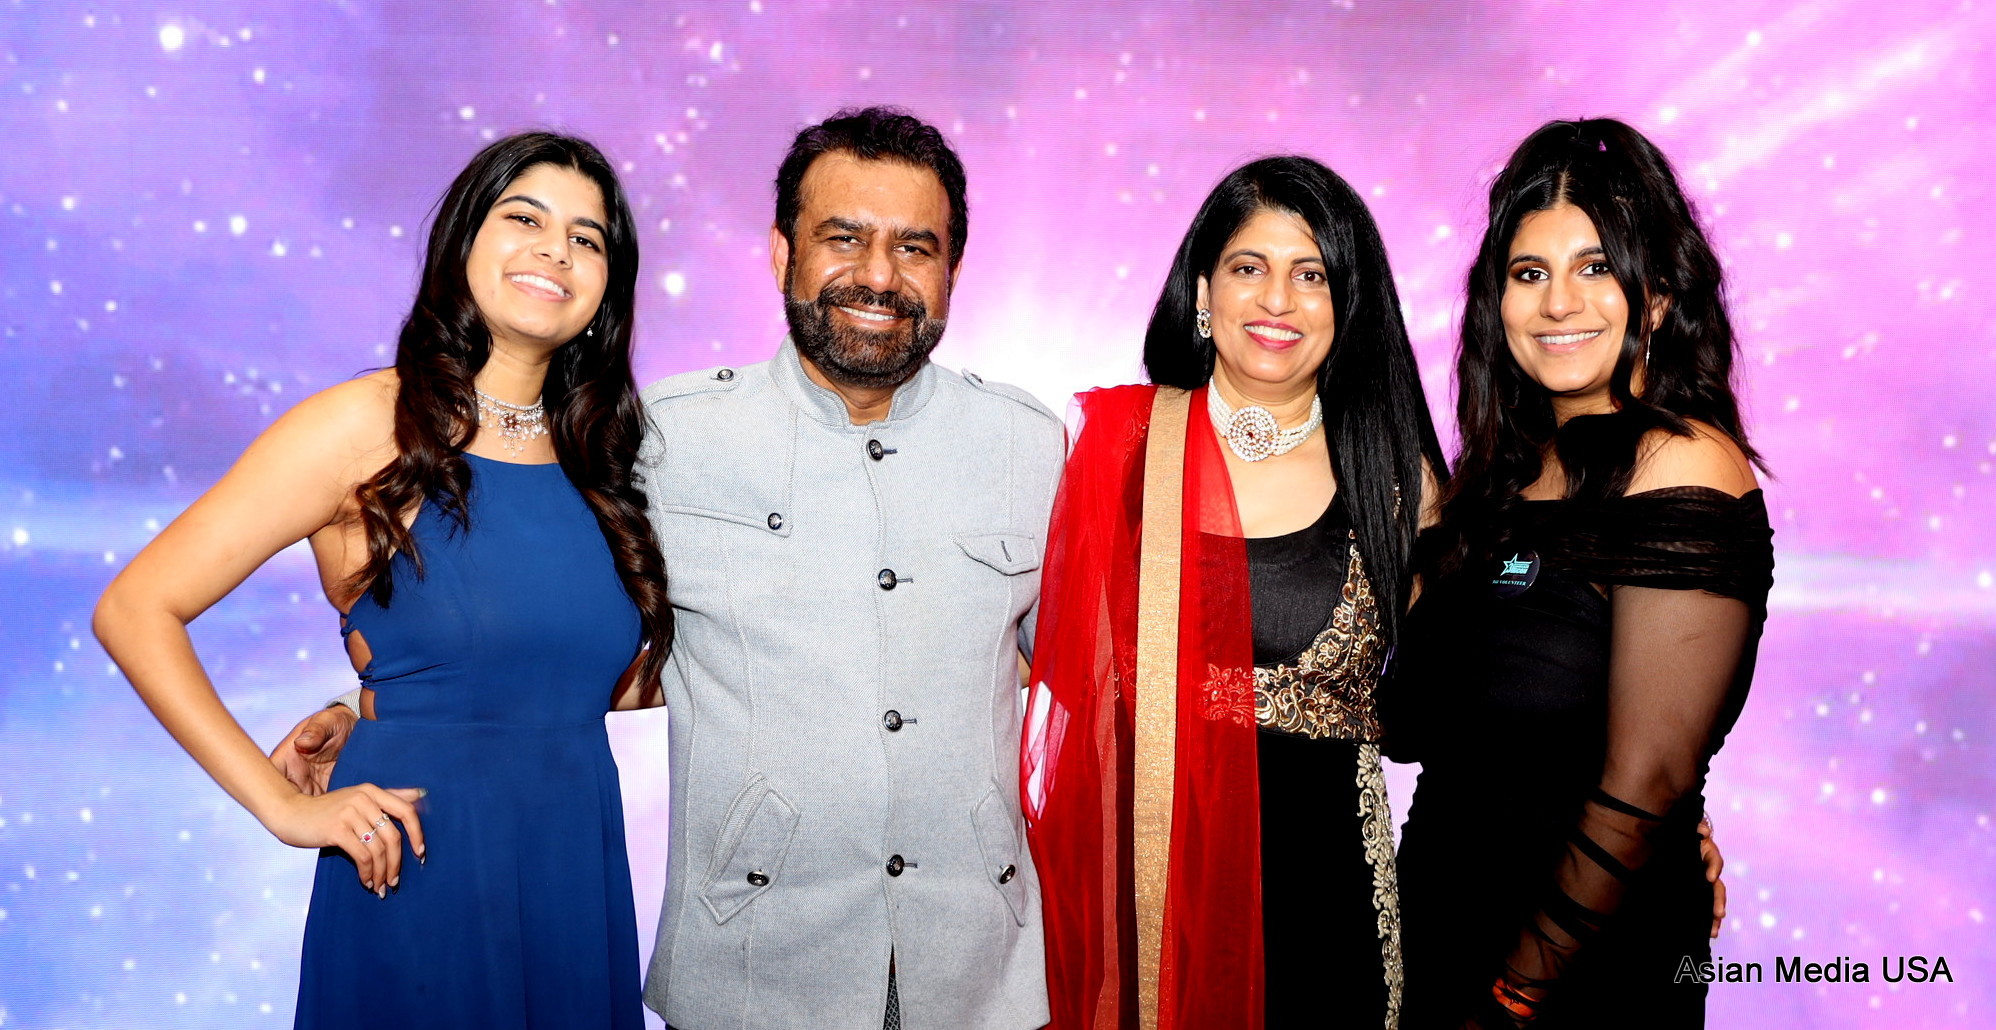 Grand Finale of 3iii: International Indian Icon becomes a global platform